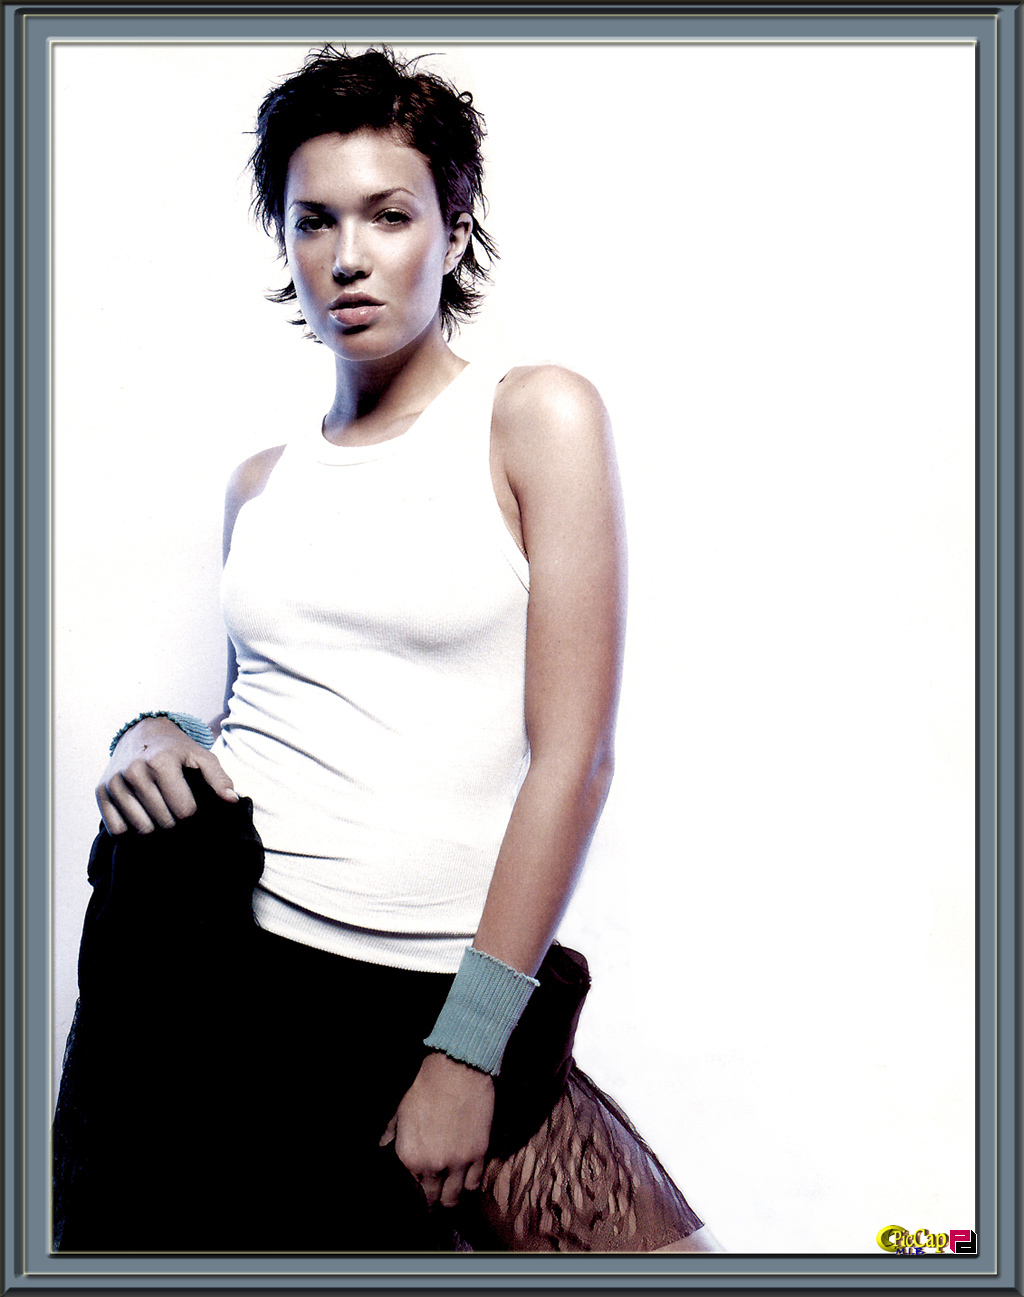 Mandy Moore photo 12 of 1129 pics, wallpaper - photo #5872 - ThePlace2